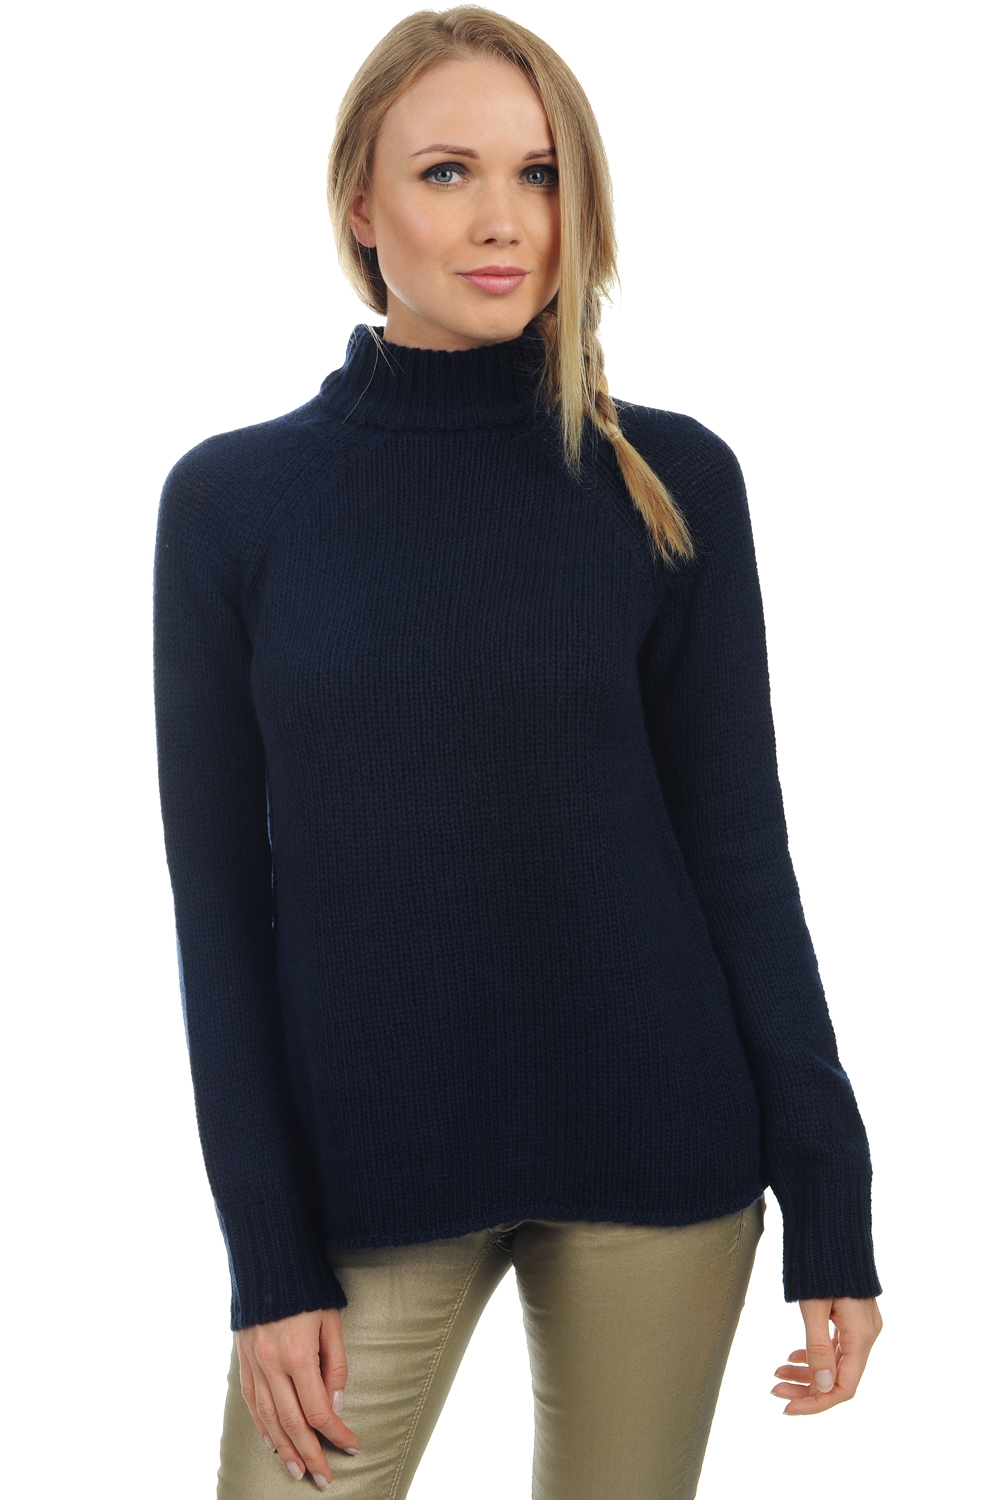 Cashmere ladies chunky sweater louisa dress blue s